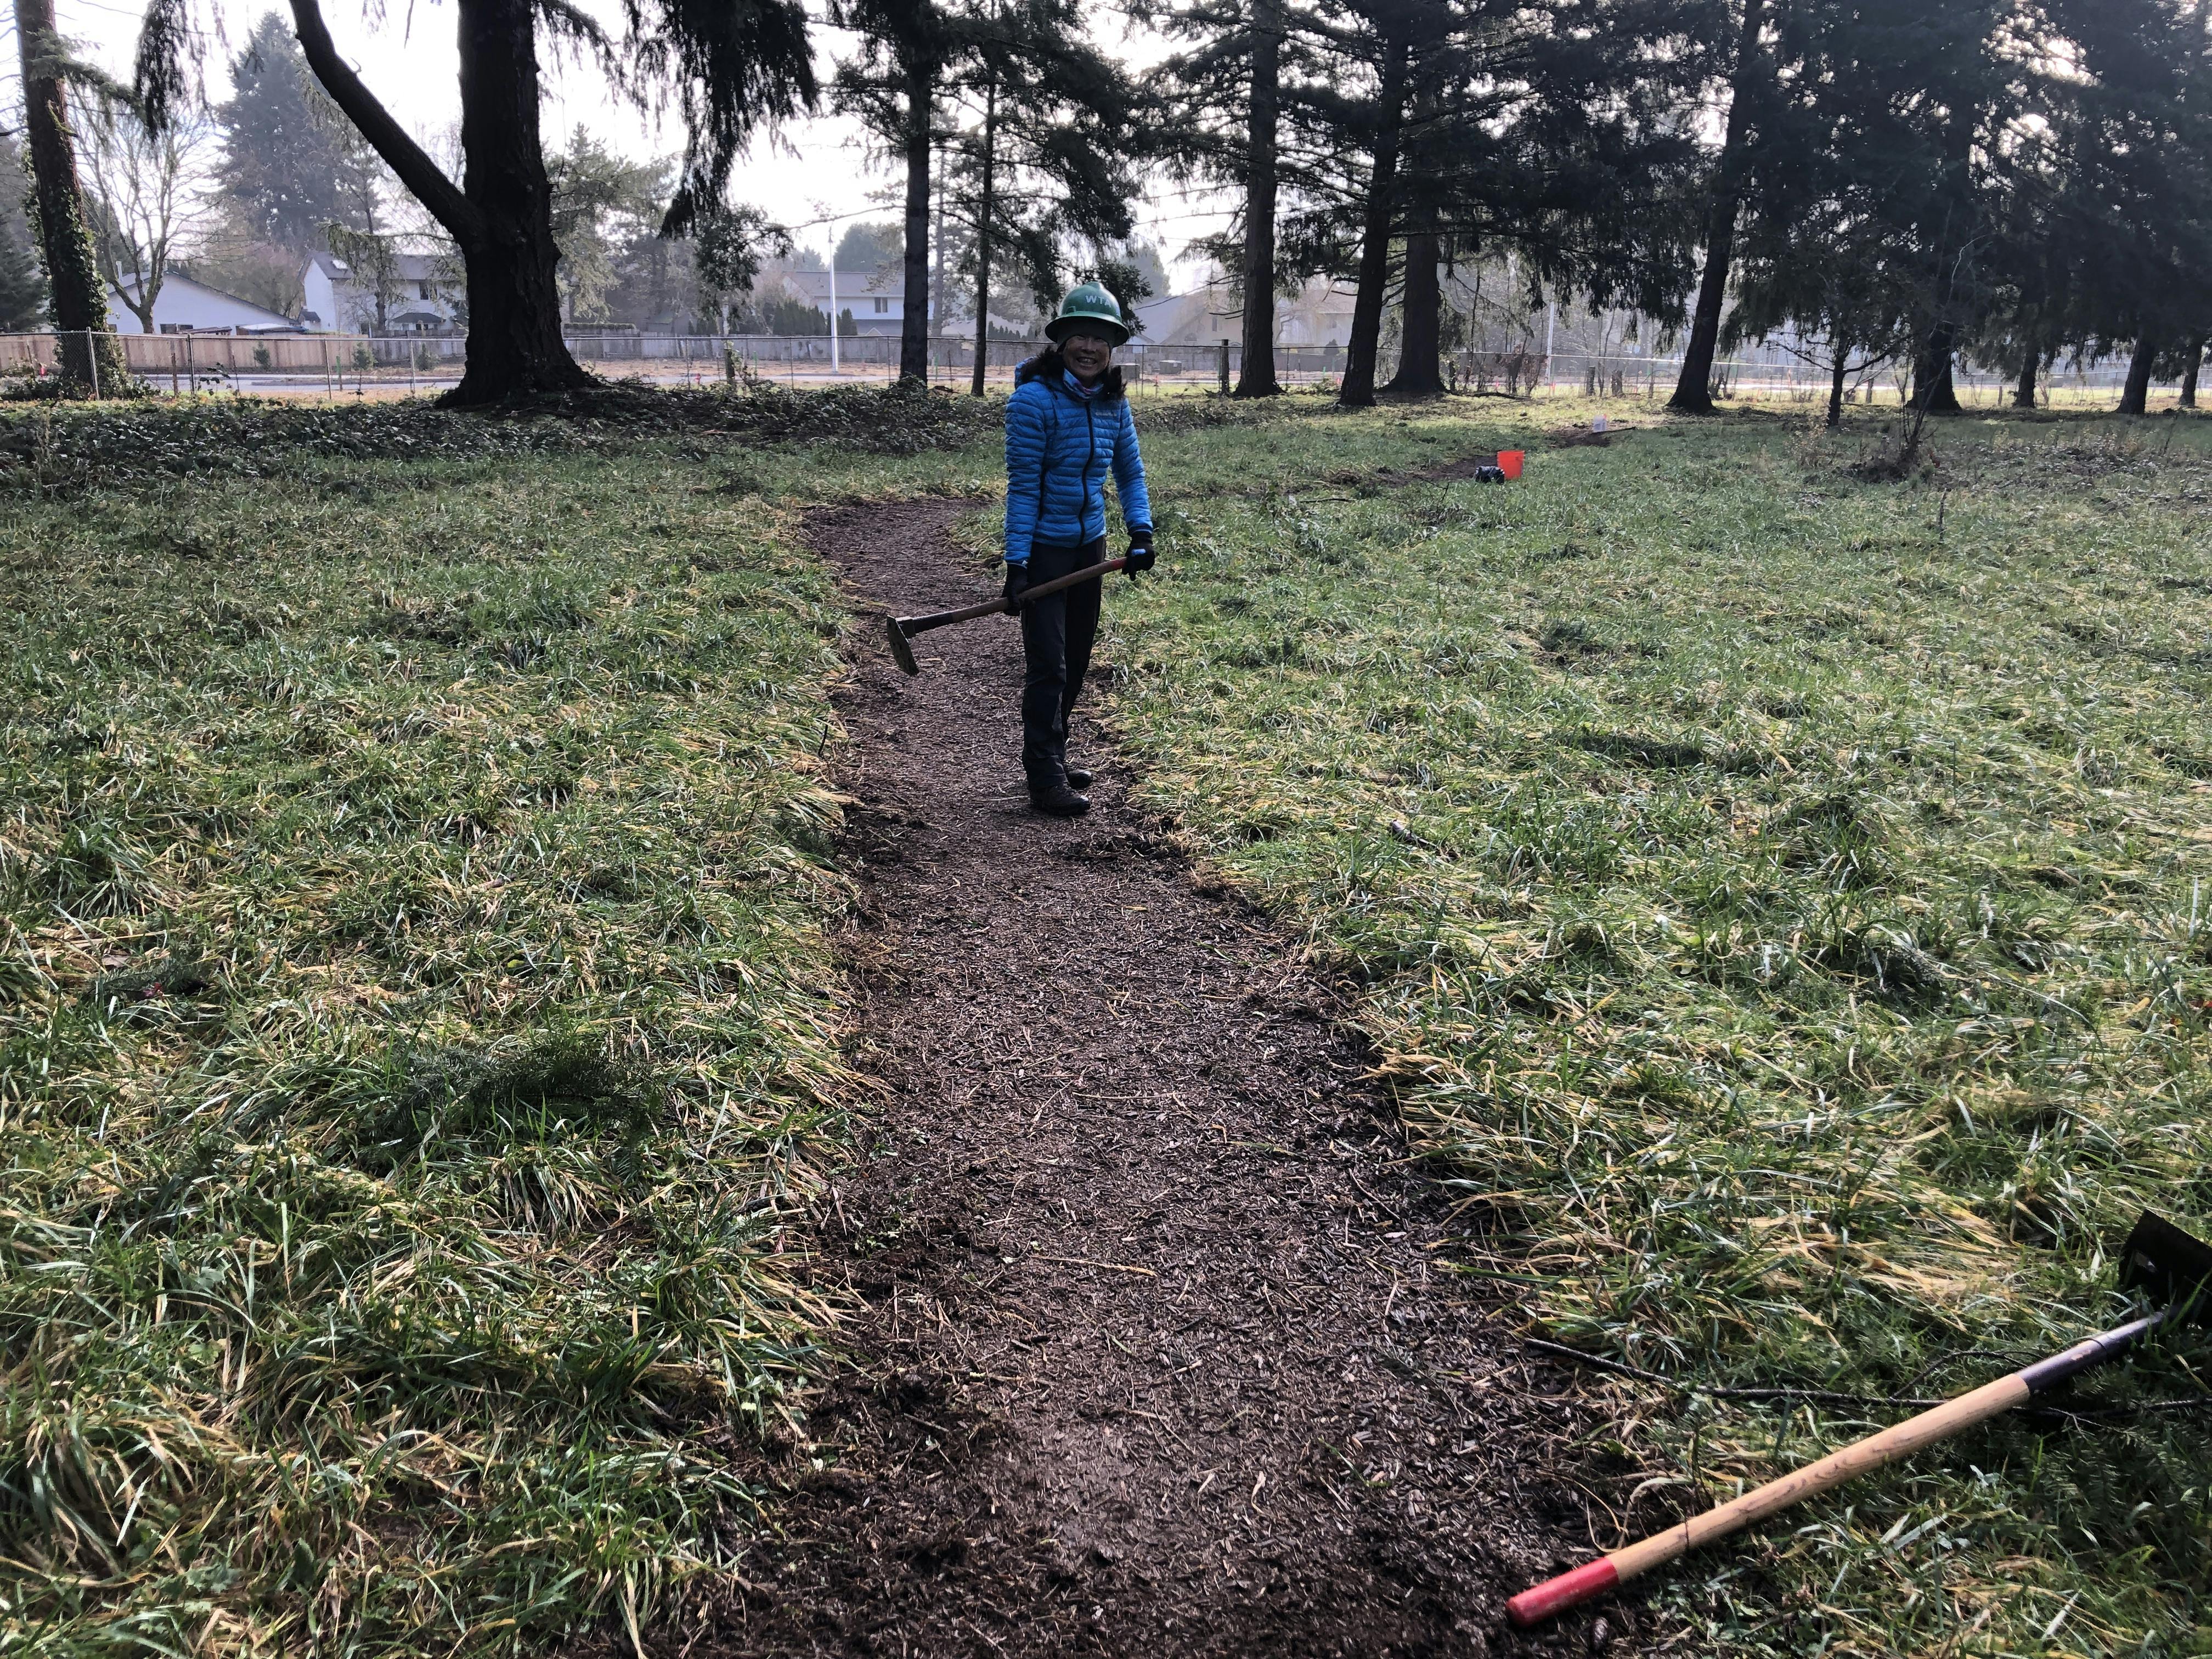 City of Vancouver volunteers continue to maintain the trails at Shaffer Park